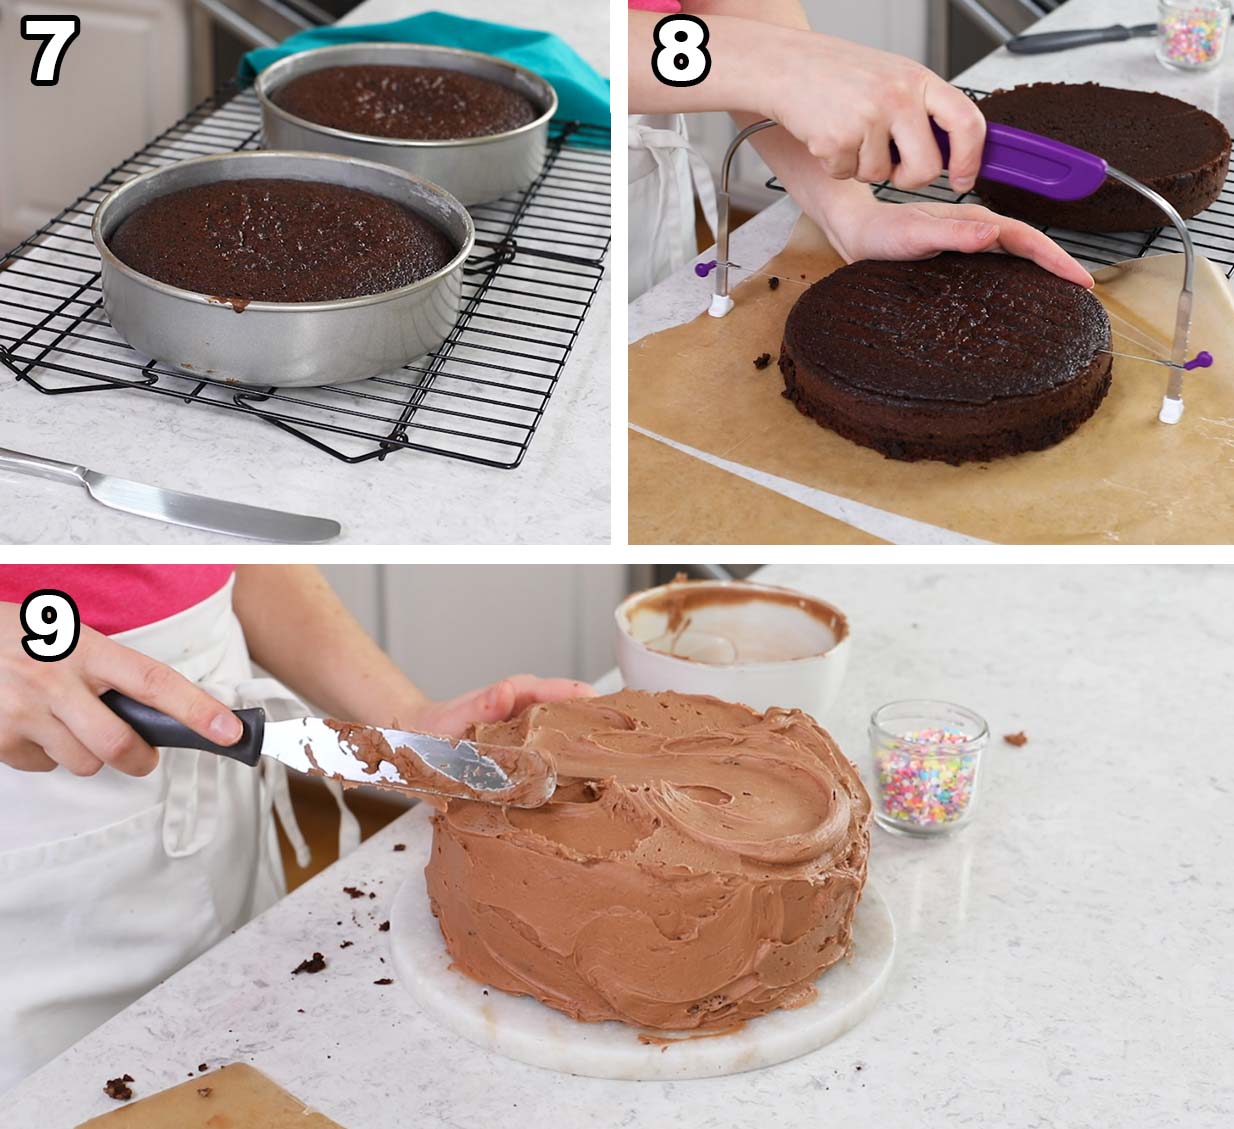 Three photos showing cake layers cooling, being leveled, and being frosted.